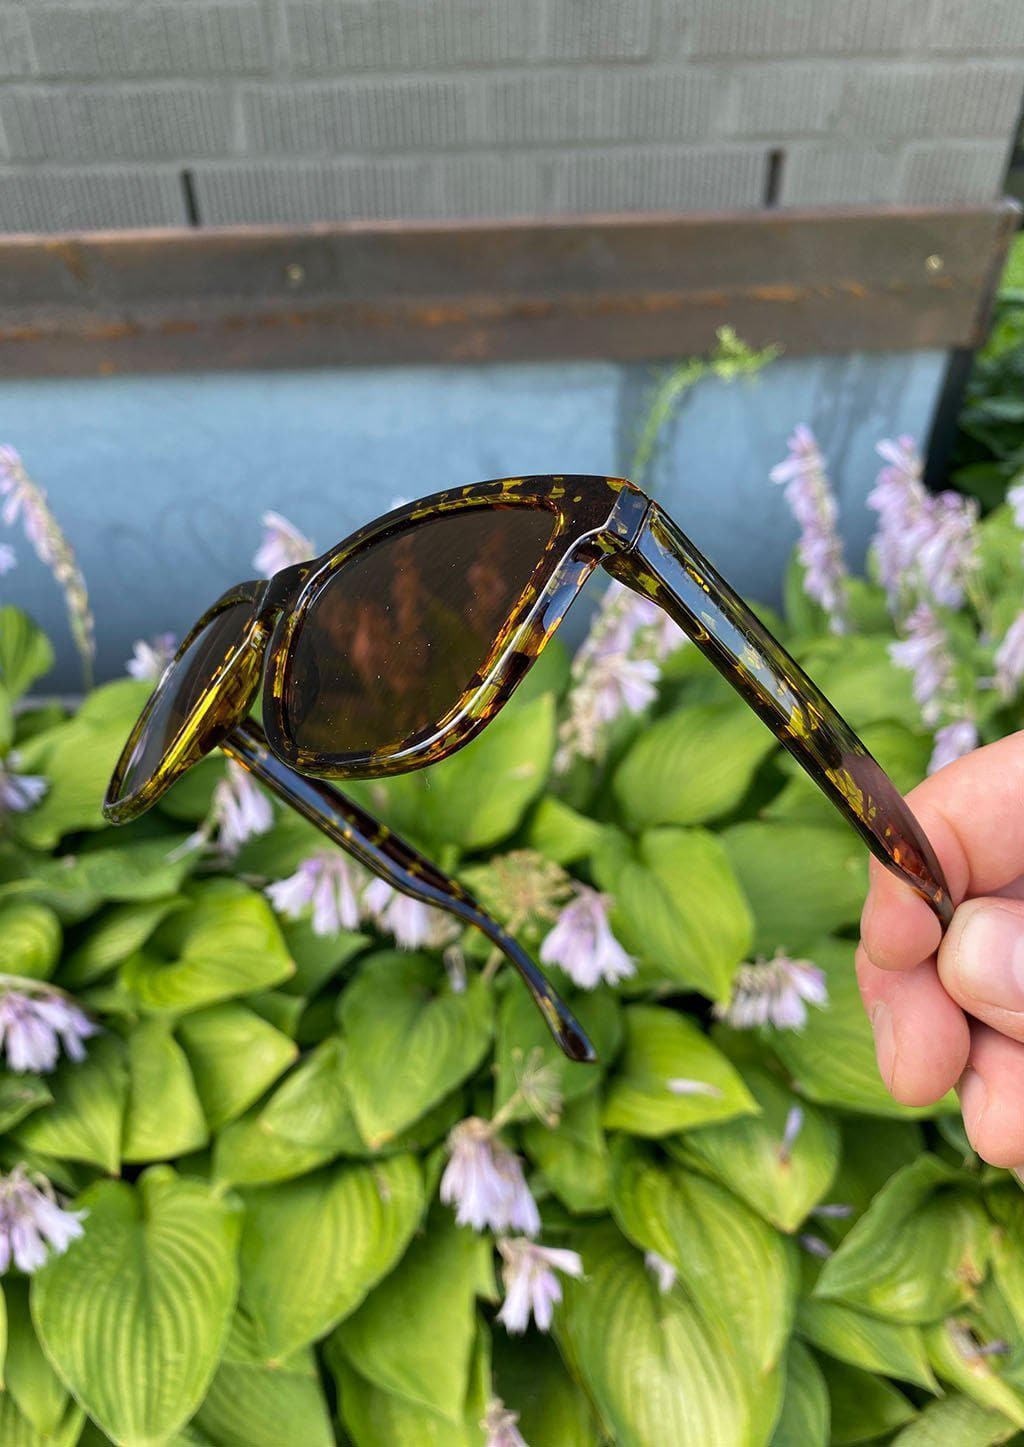 Our Mood V2 is an improved version of our last wayfarers. Plastic body for great quality and durabilty. This is Chic with tortoise frame and brown lenses. Out in the nature.